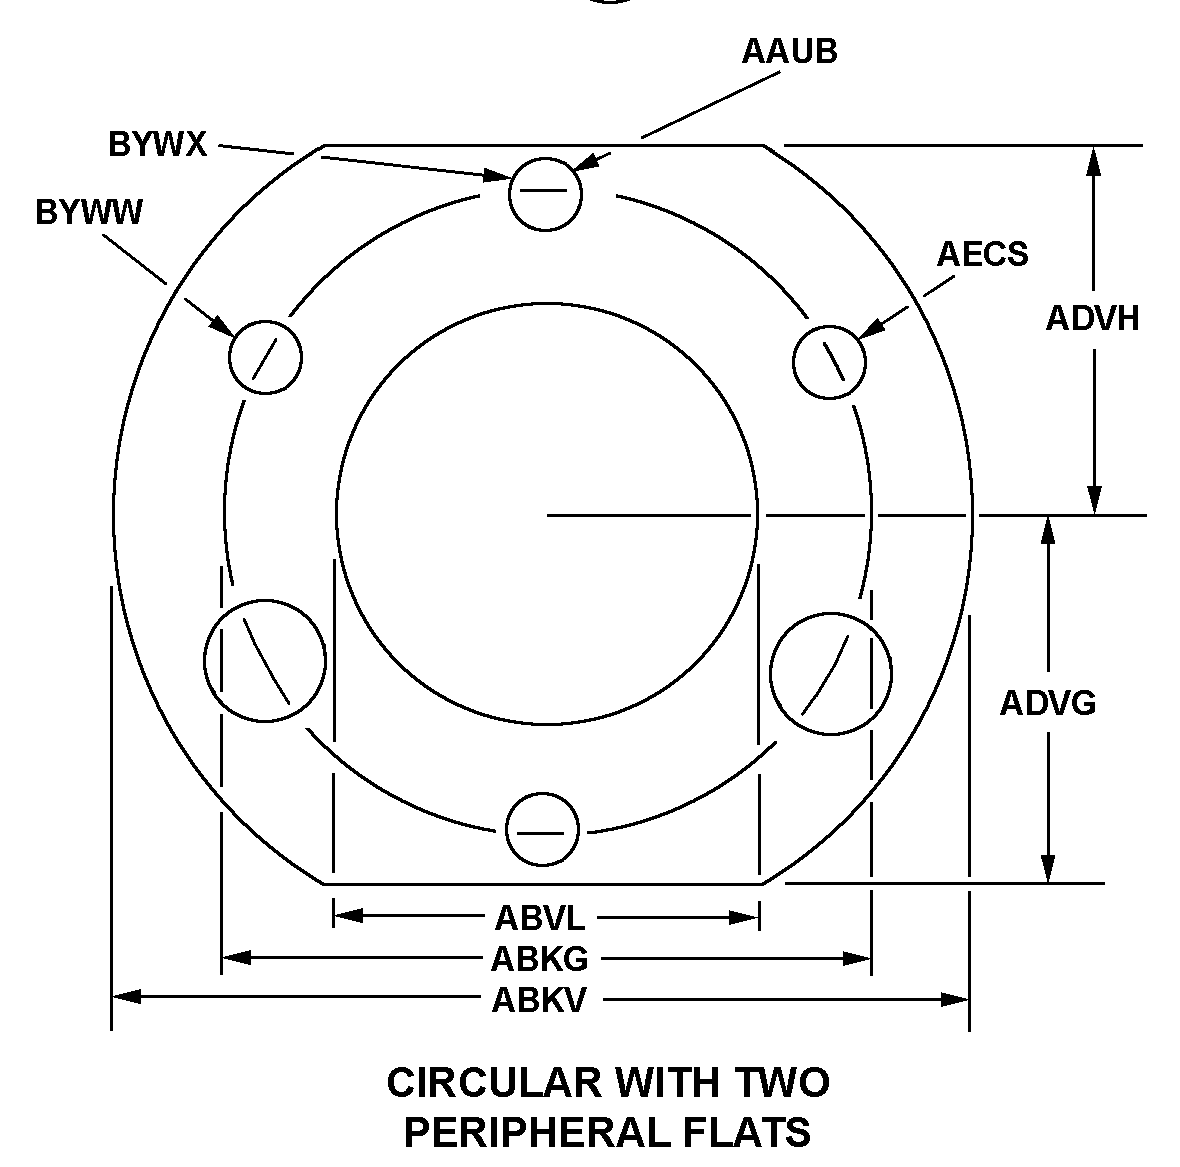 CIRCULAR WITH TWO PERIPHERAL FLATS style nsn 5330-01-061-8363